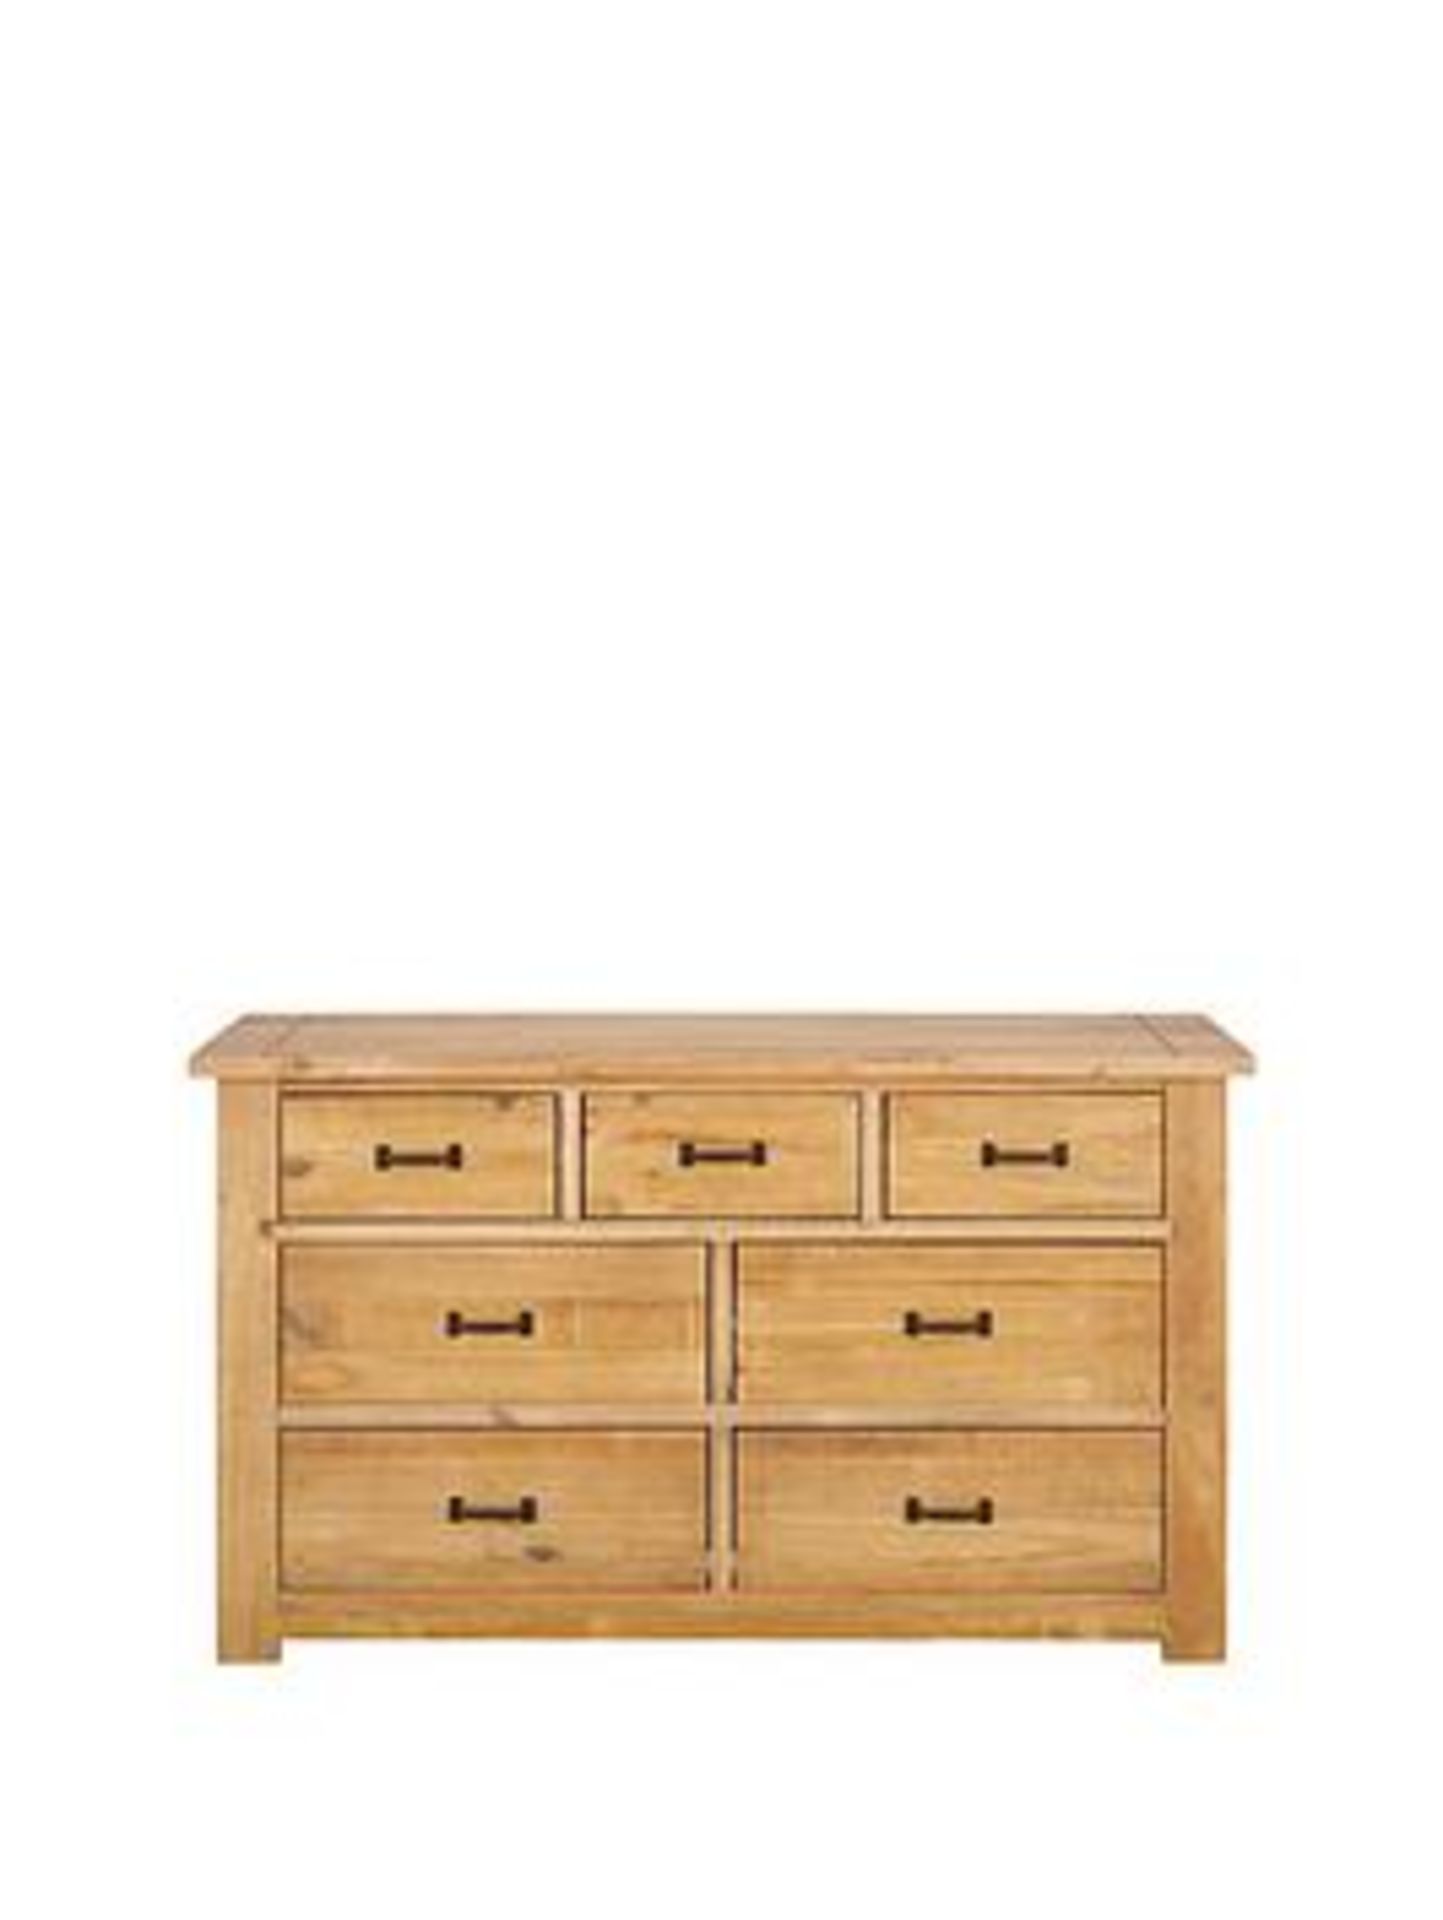 Boxed Item Albion 7 Drawers Chest [Pine] 77X125X40Cm Rrp:£474.0